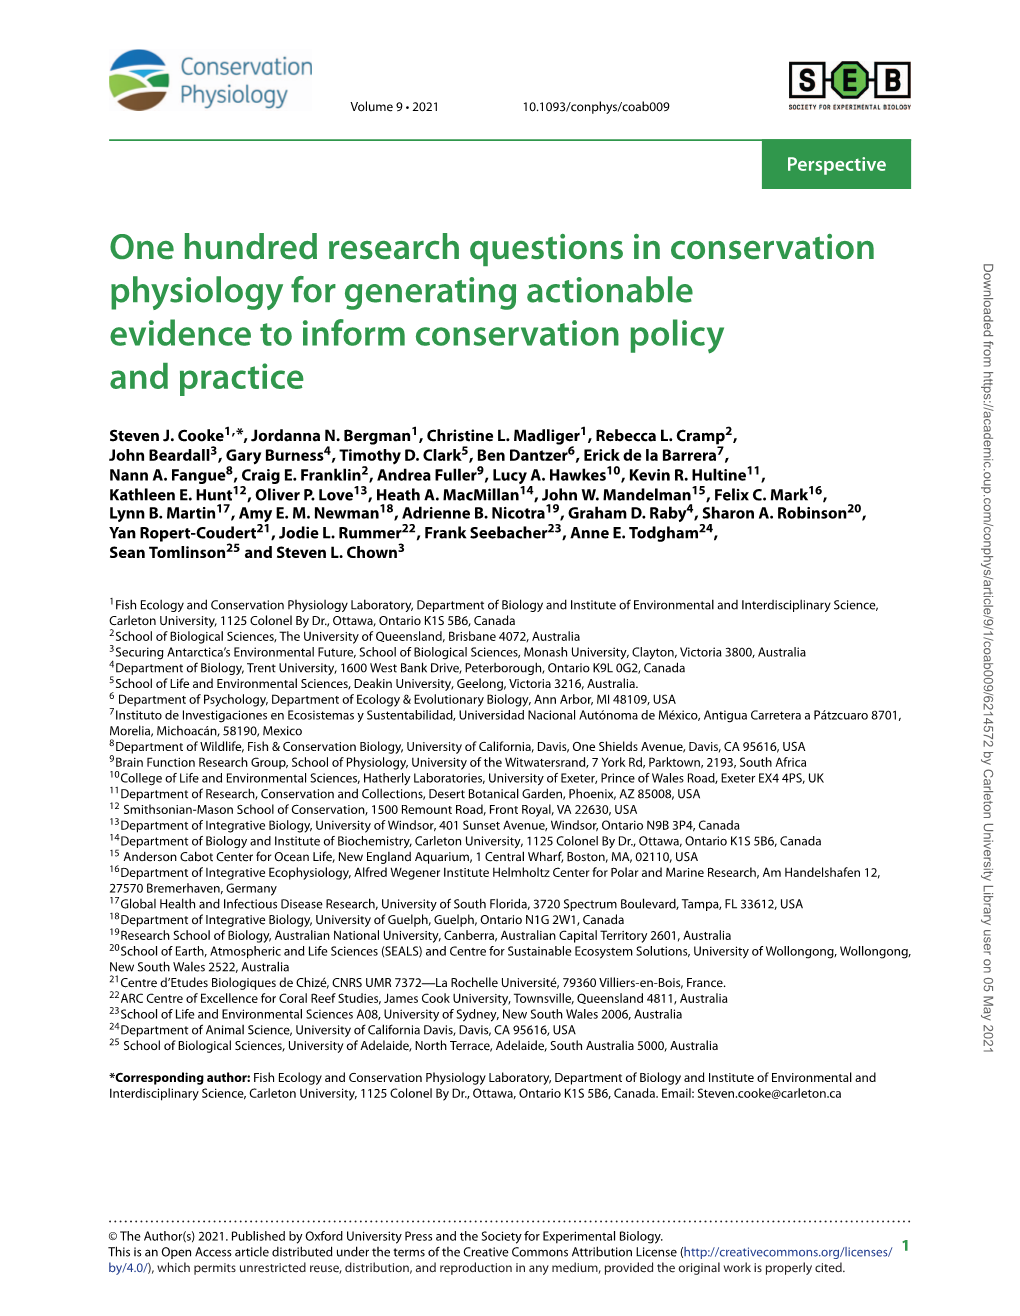 One Hundred Research Questions in Conservation Physiology for Generating Actionable Evidence to Inform Conservation Policy and Practice